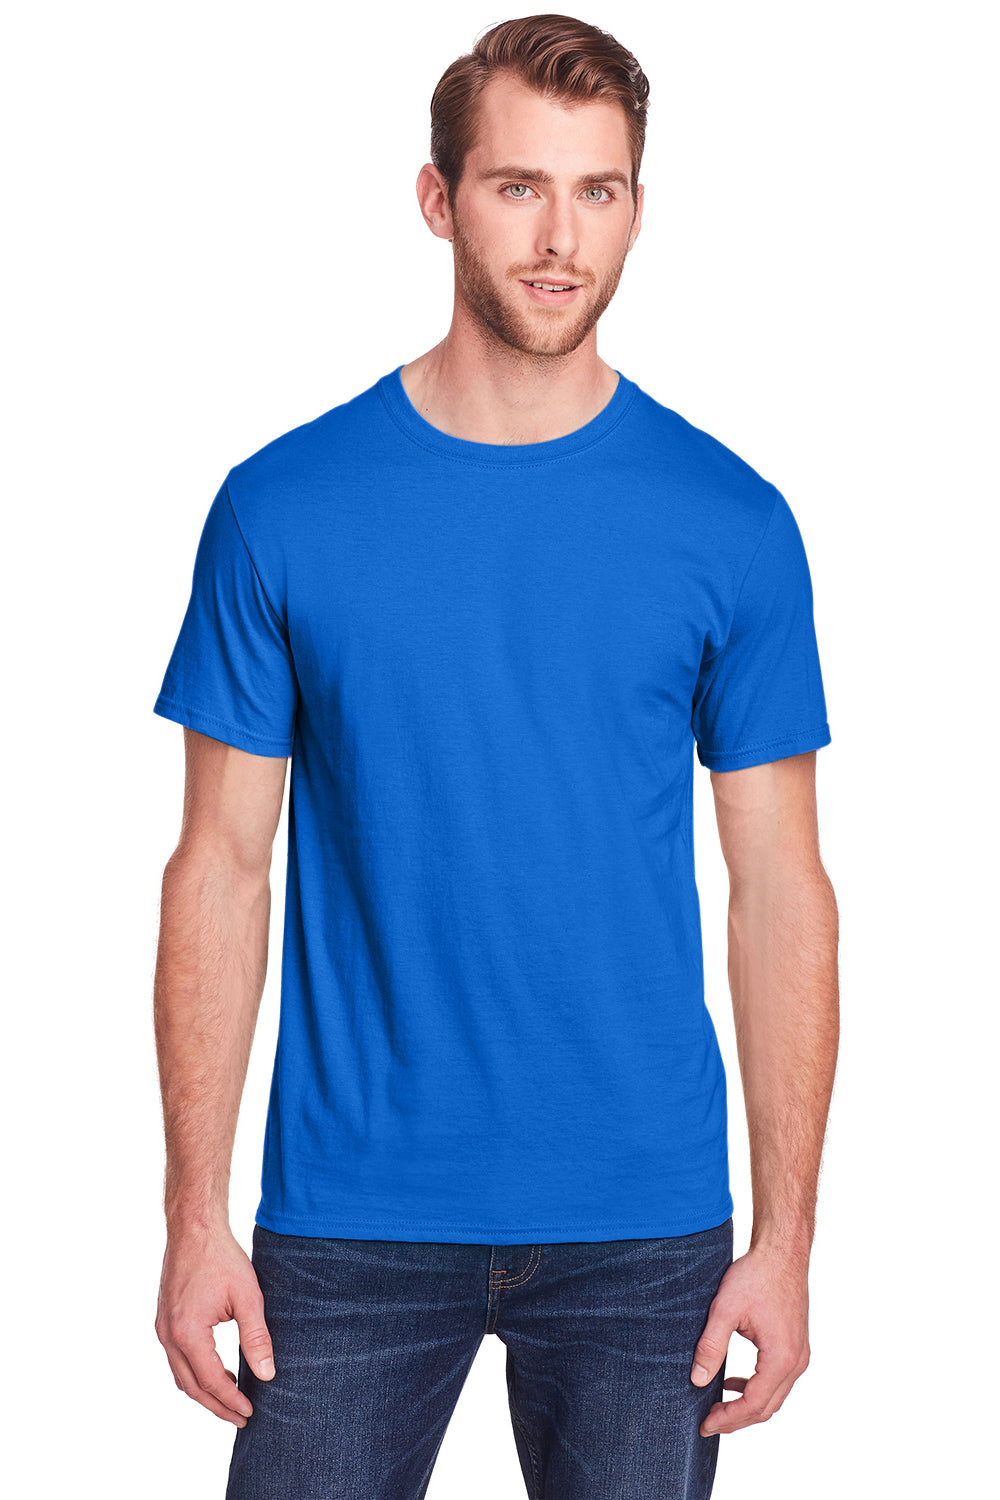 Fruit Of The Loom IC47MR Mens Iconic Short Sleeve Crewneck T-Shirt Royal Blue Front